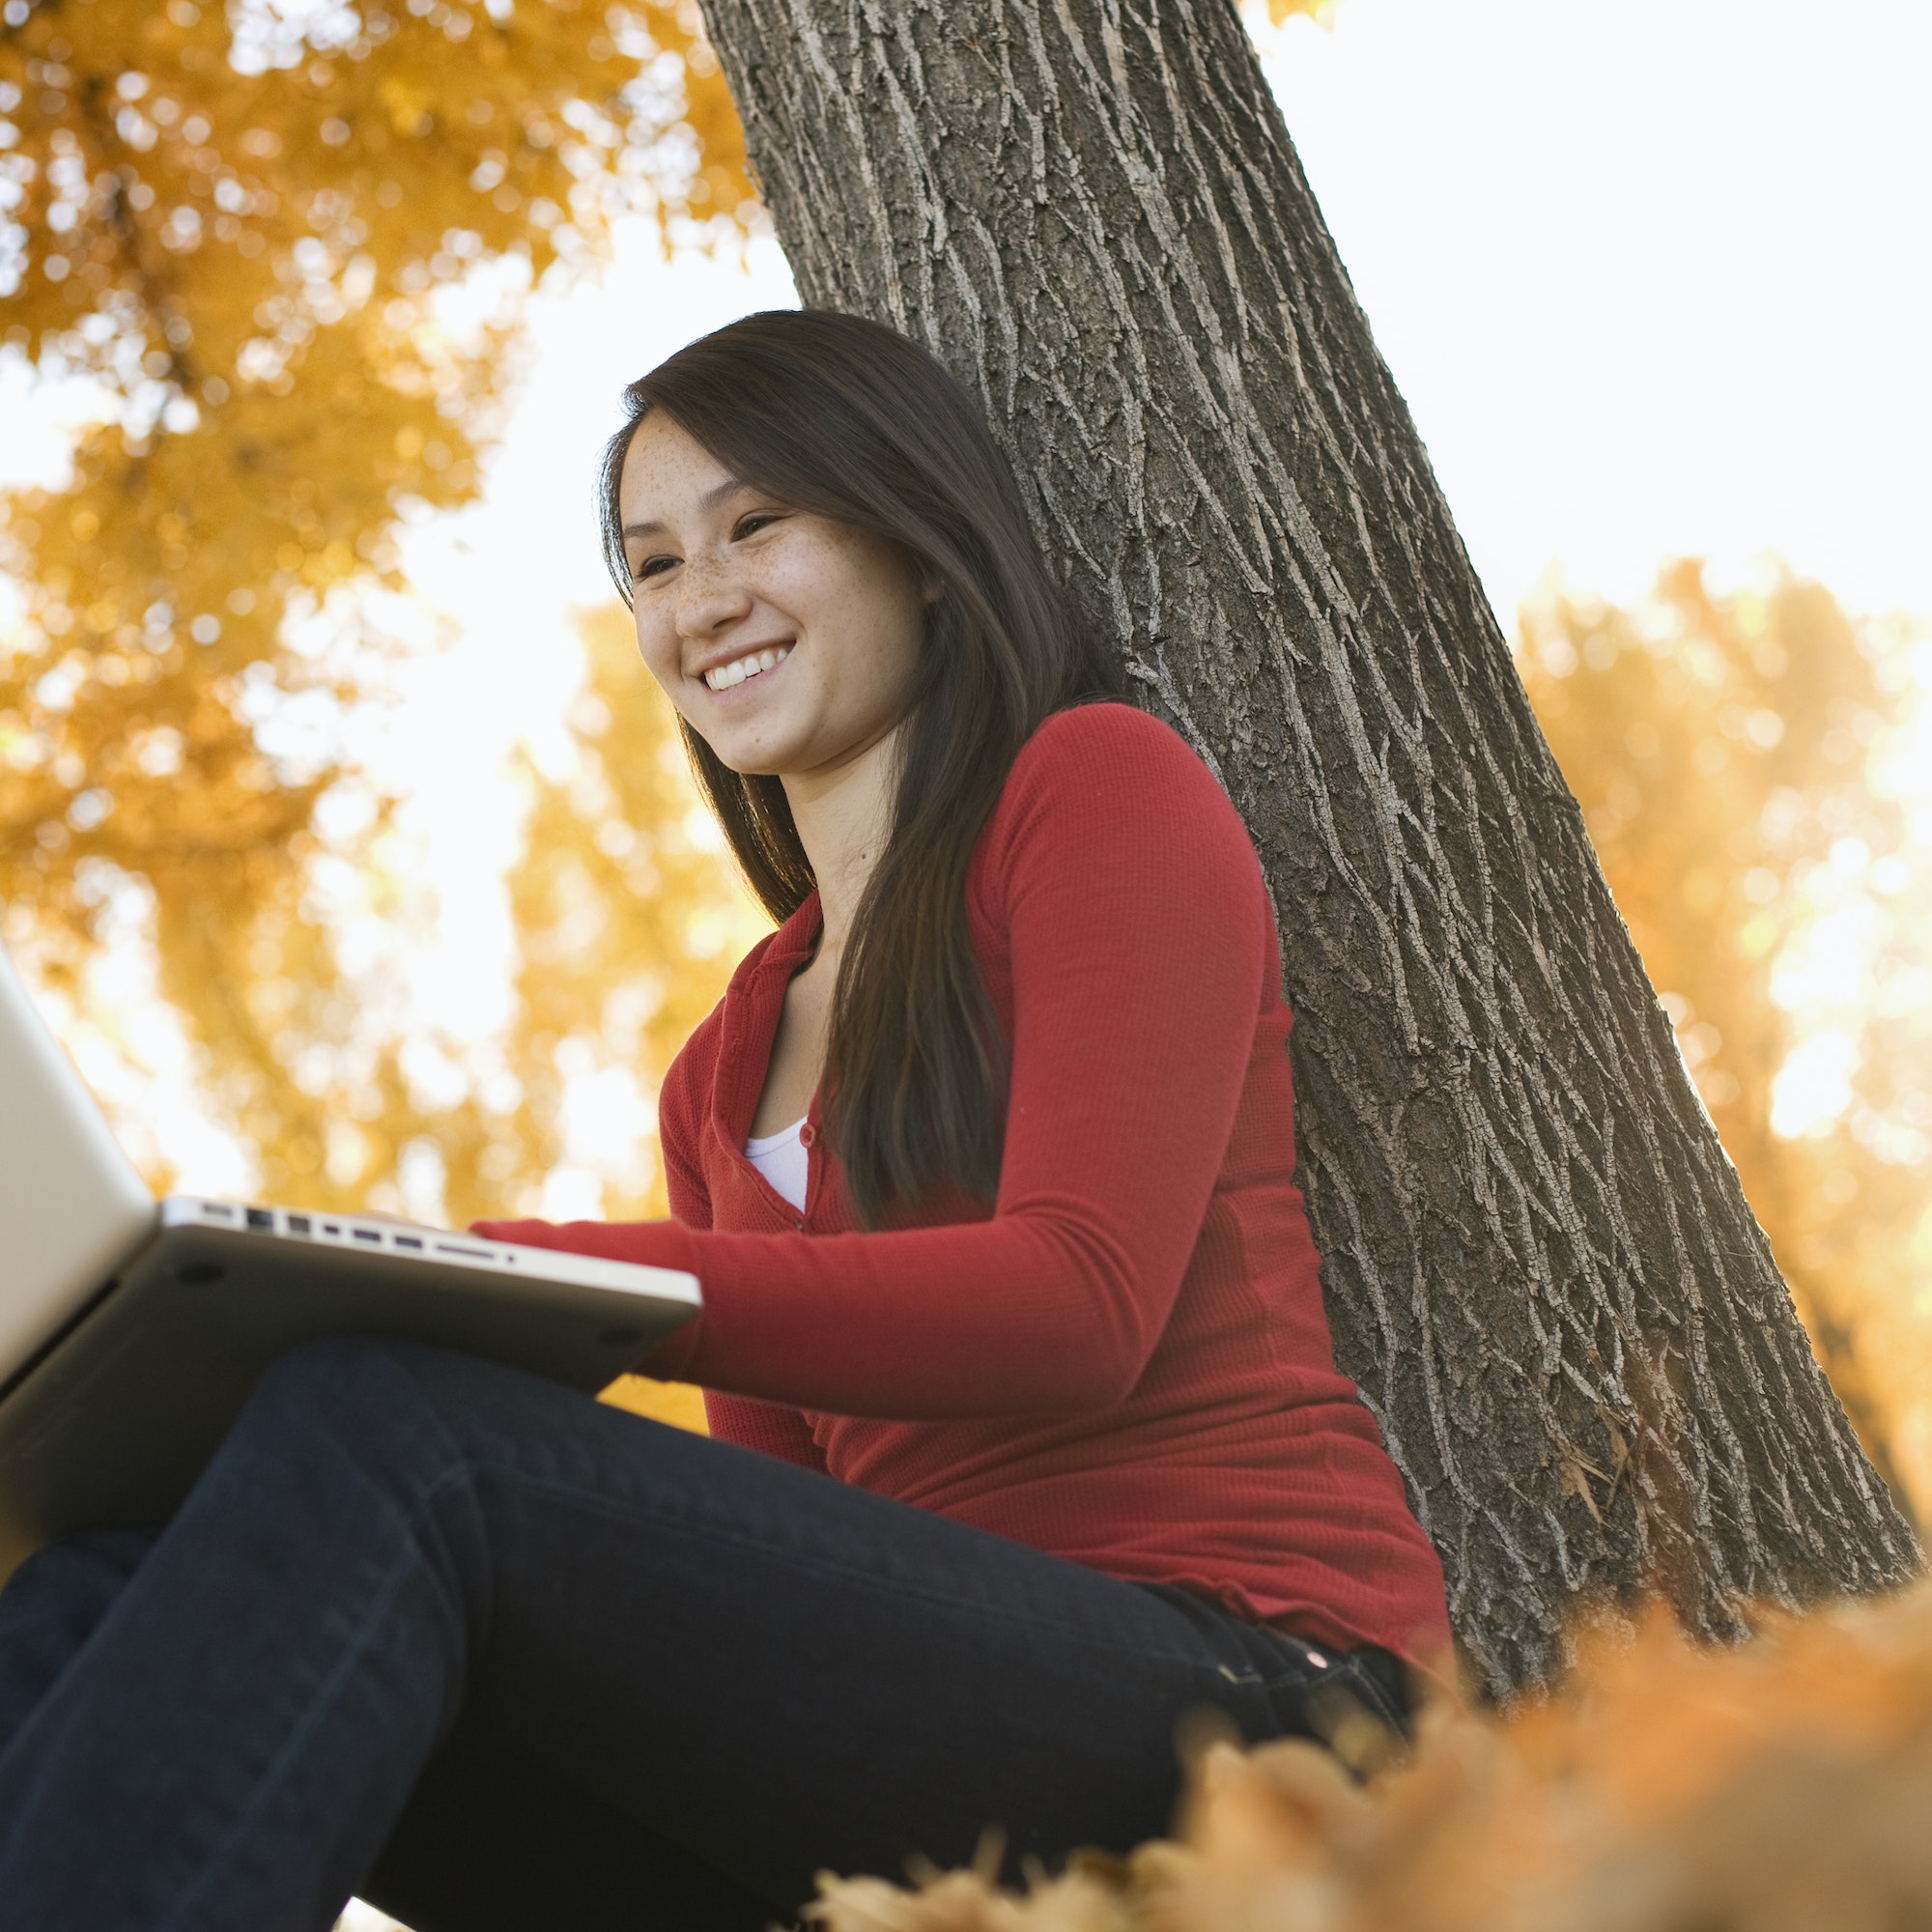 A young woman seated by a tree using a laptop computer.